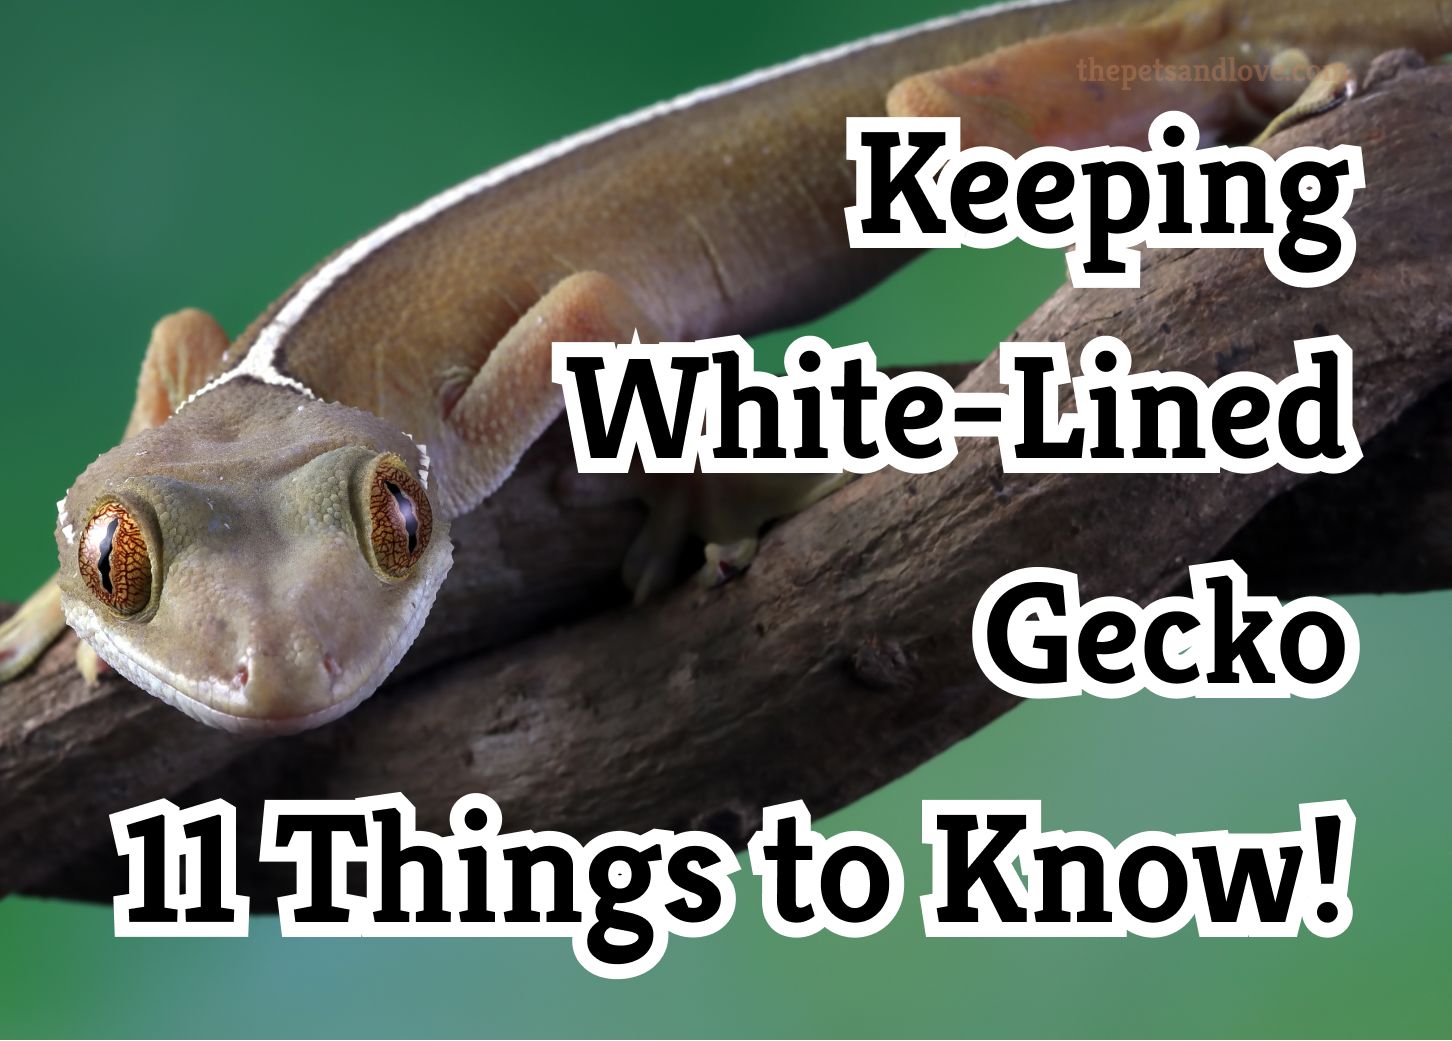 Keeping white-lined geckos. 11 things you need to know